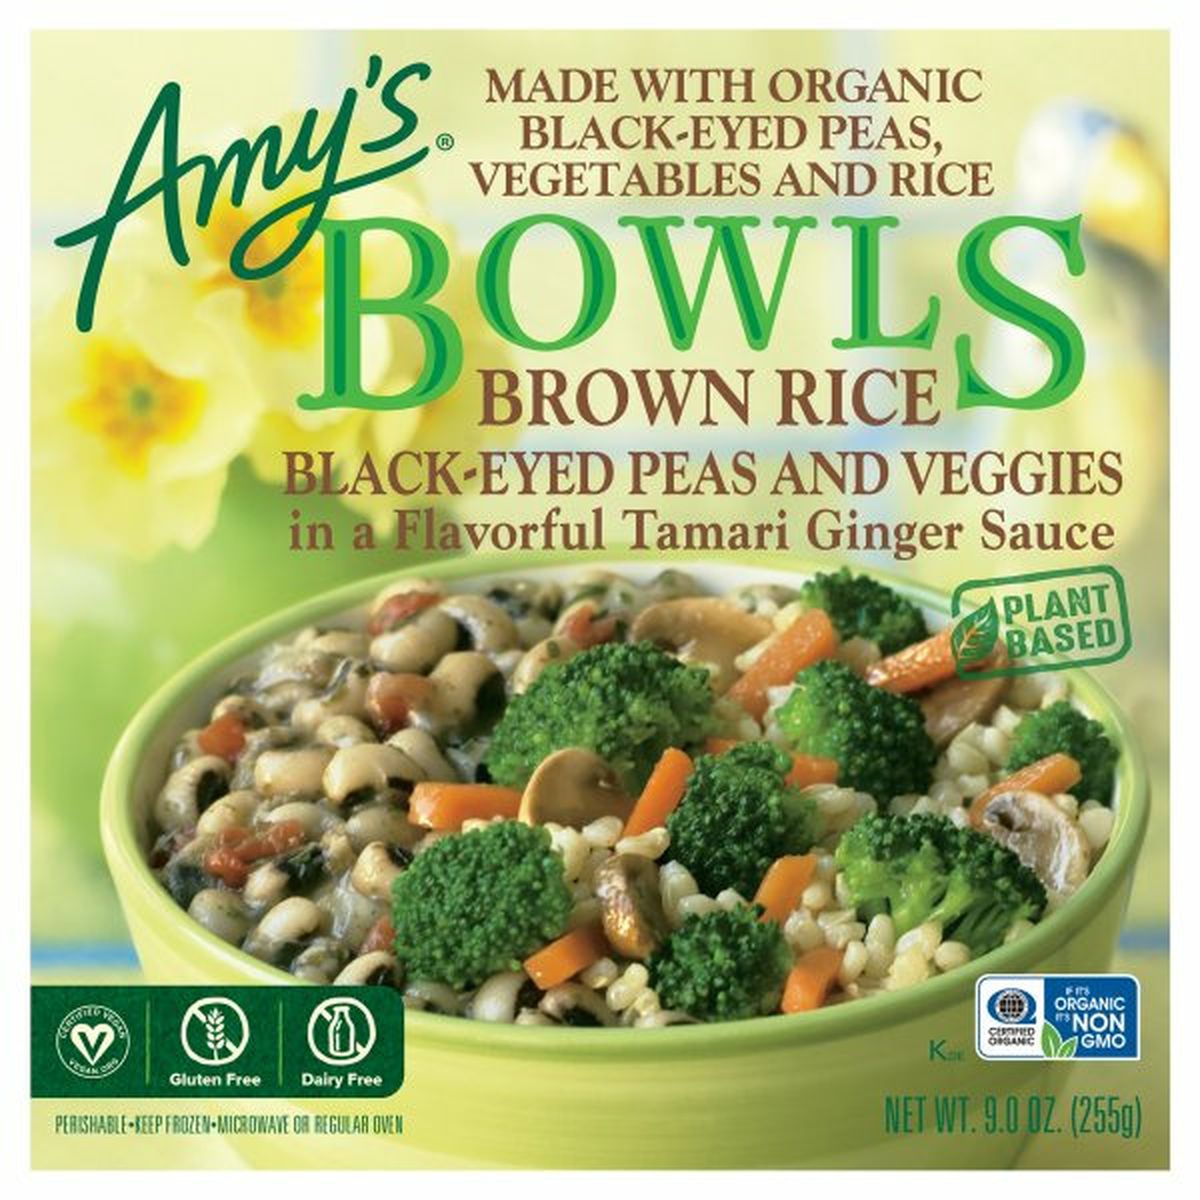 Calories in Amy's Kitchen Bowls Brown Rice, Black-Eyed Peas and Veggies